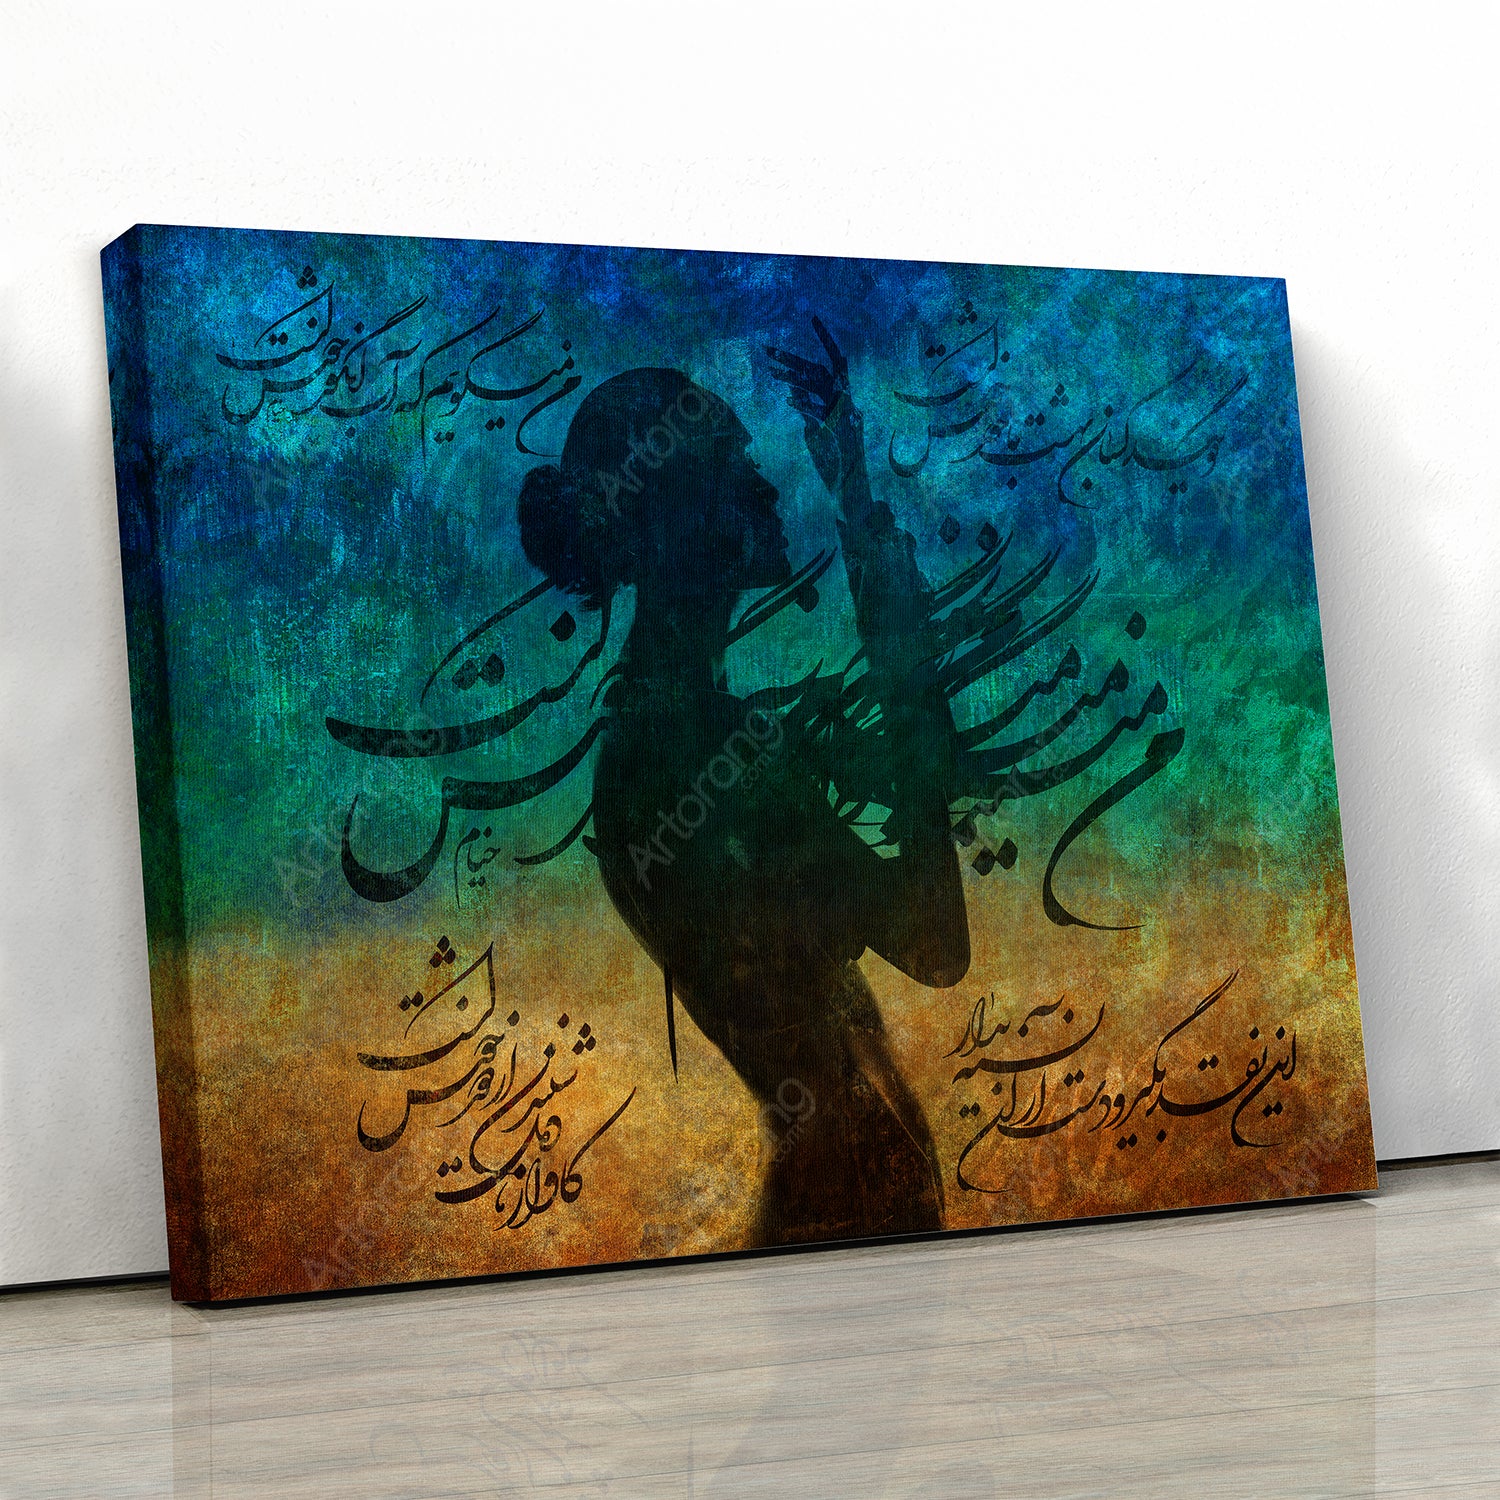 How Blest The Paradise To Come, Khayyam quote with Persian calligraphy wall art - Artorang